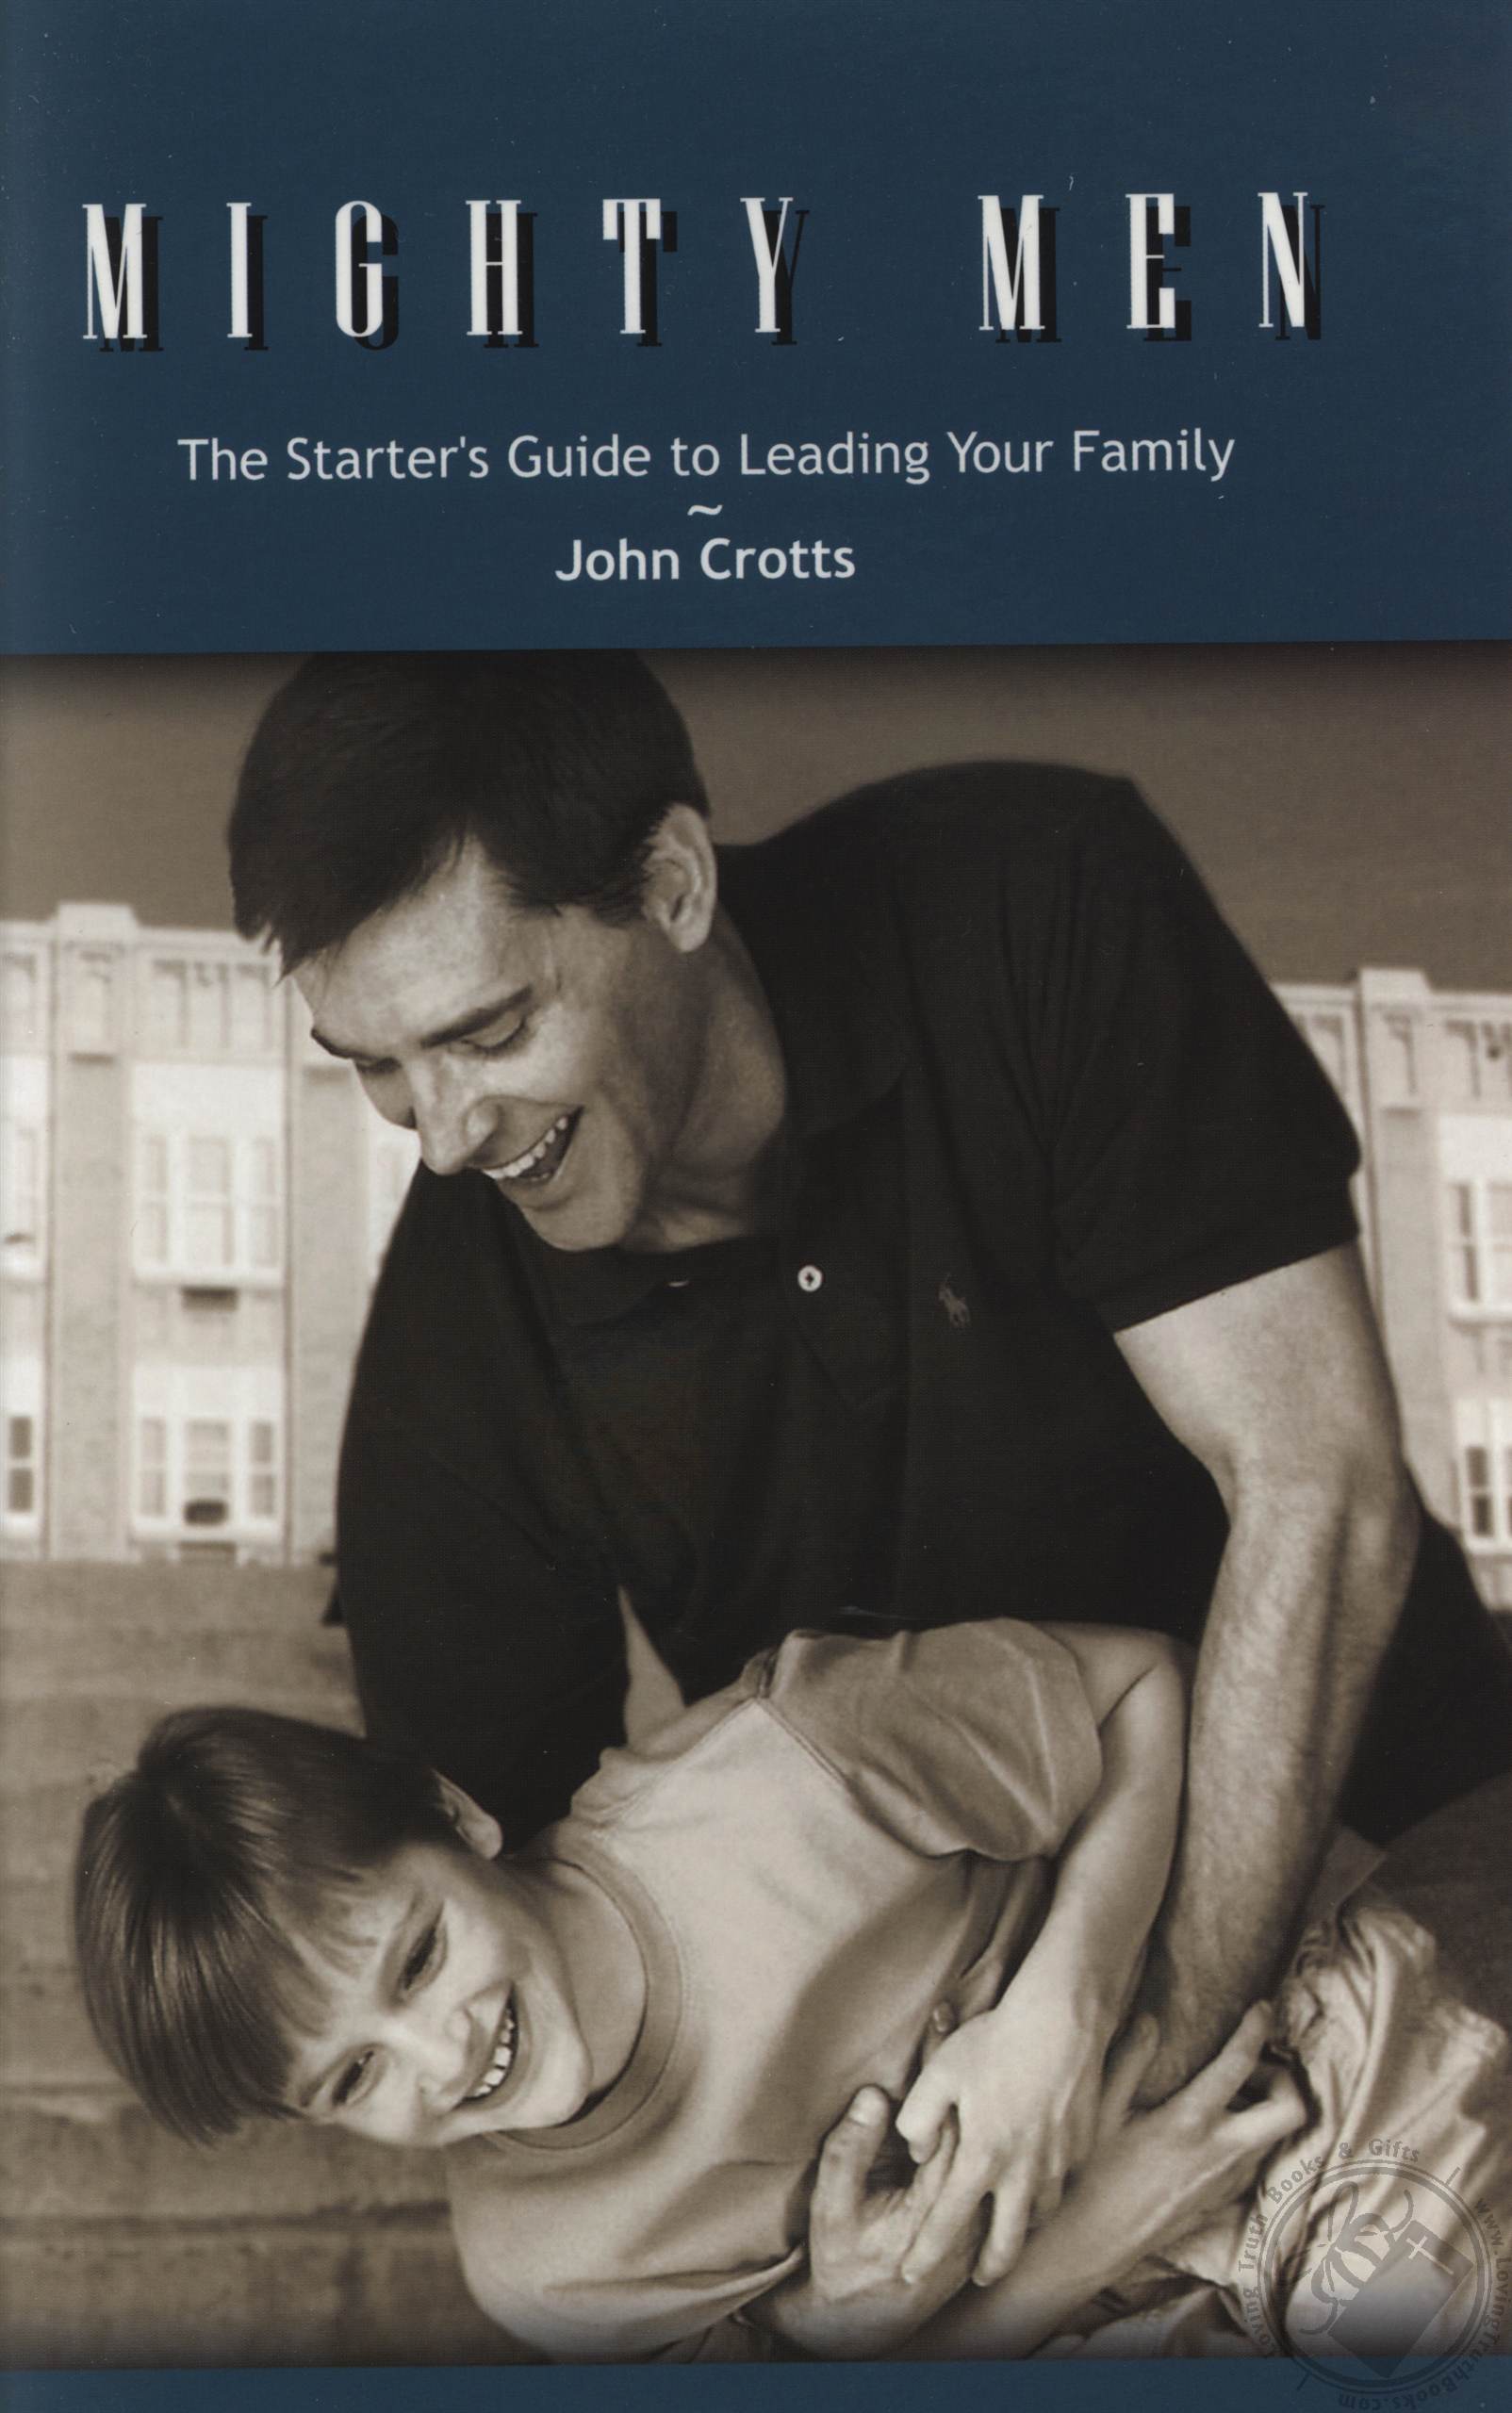 Mighty Men The Starter's Guide to Leading Your Family by John Crotts (Book / Booklet) (Loving